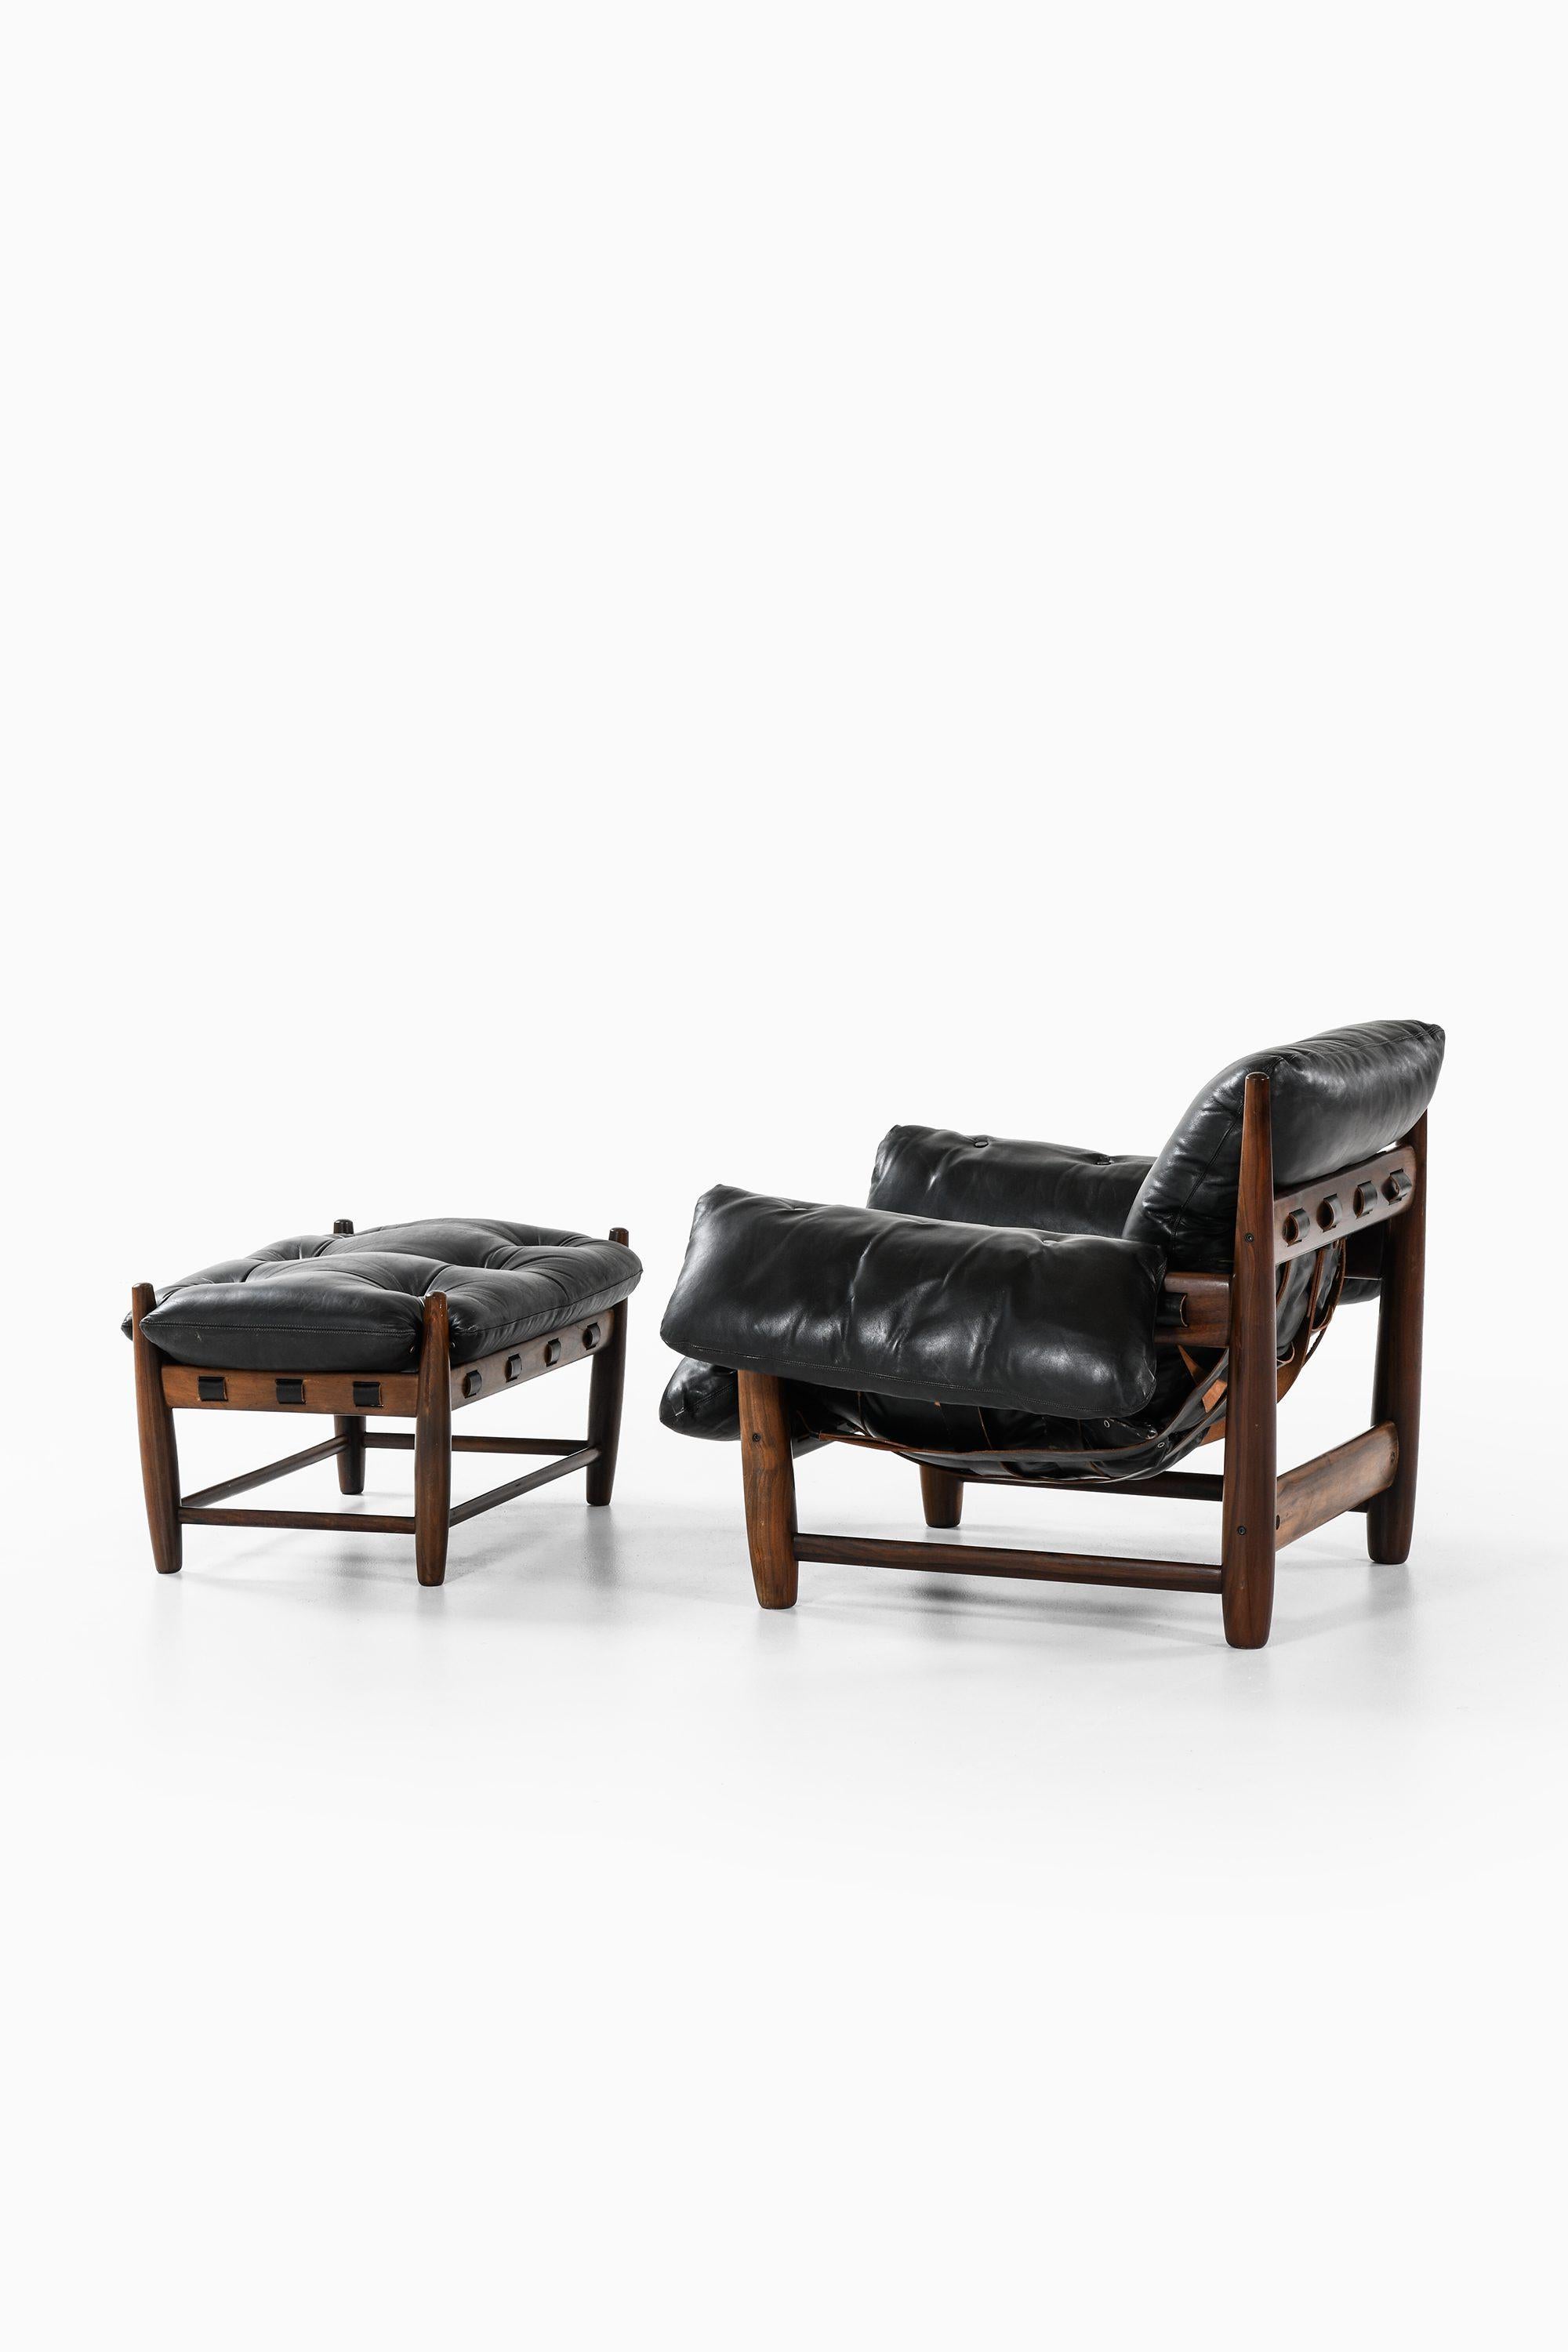 Pair of Easy Chairs and Stool in Jacaranda and Leather by Sergio Rodrigues, 1957

Additional Information:
Material: Jacaranda and leather
Style: Mid century, Brazil
Rare pair of easy chairs and stool model Mole
Produced in Brazil
Dimensions